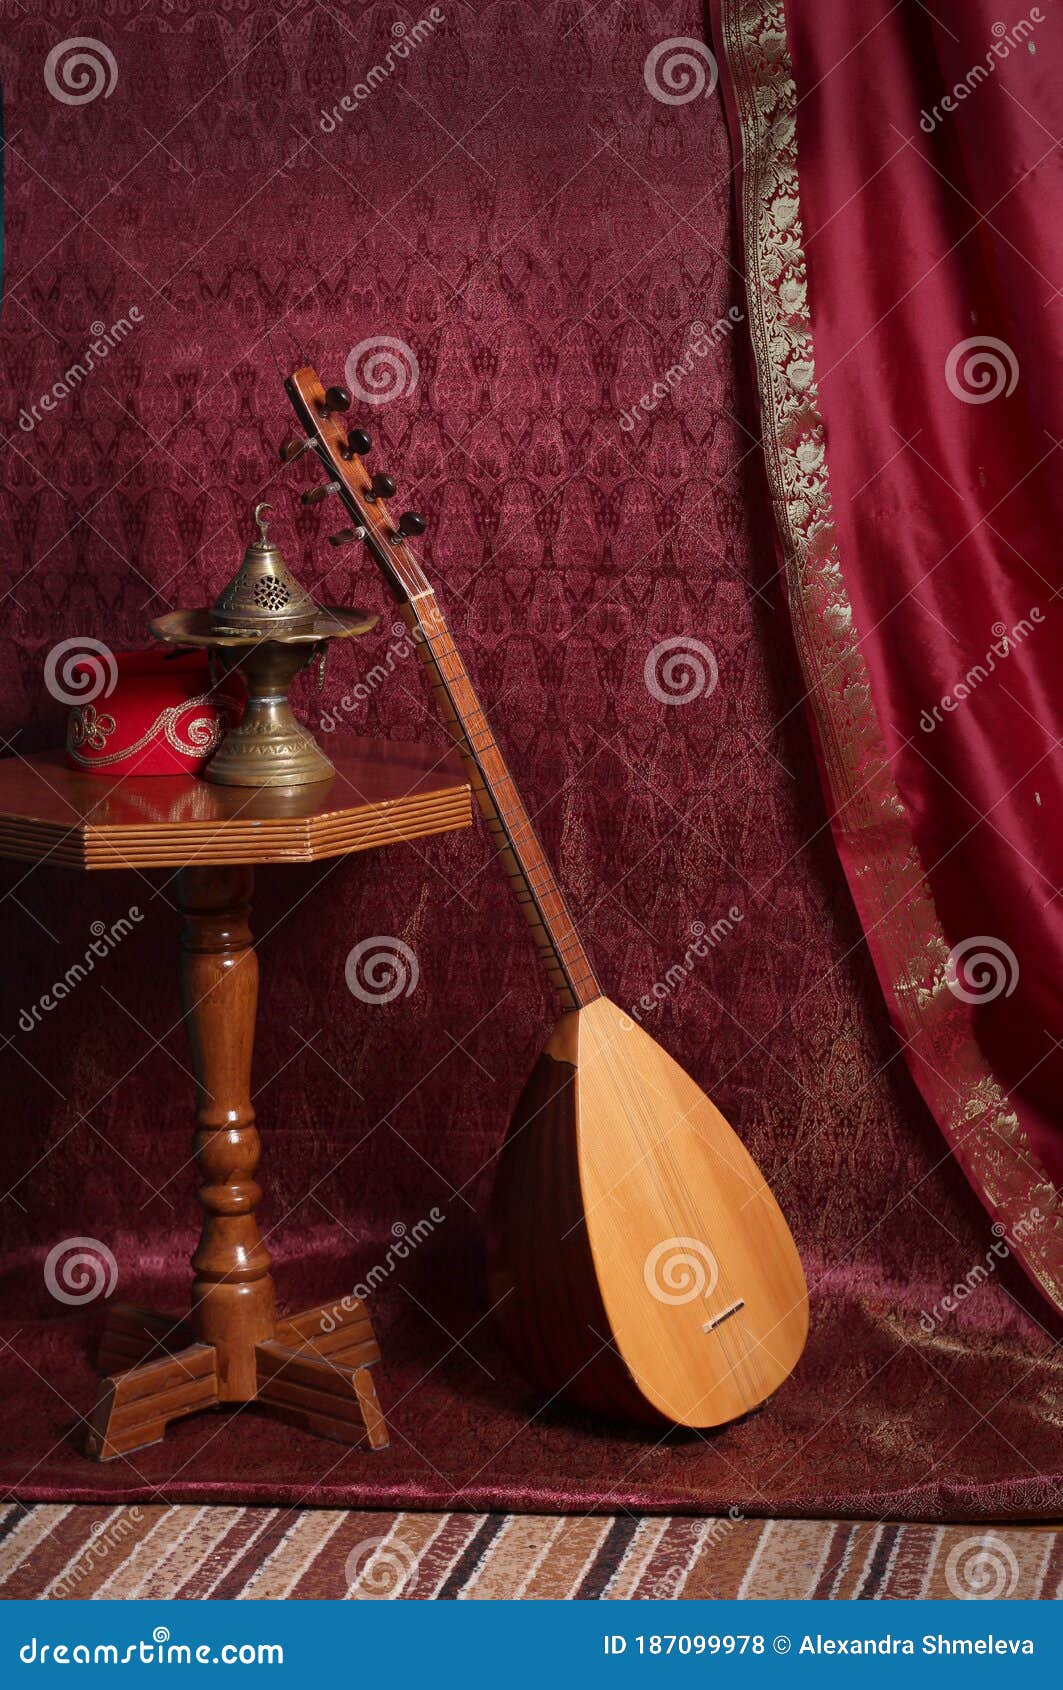 still life in turkish oriental style censer fez baglama saz on the table stock photo image of house classical 187099978